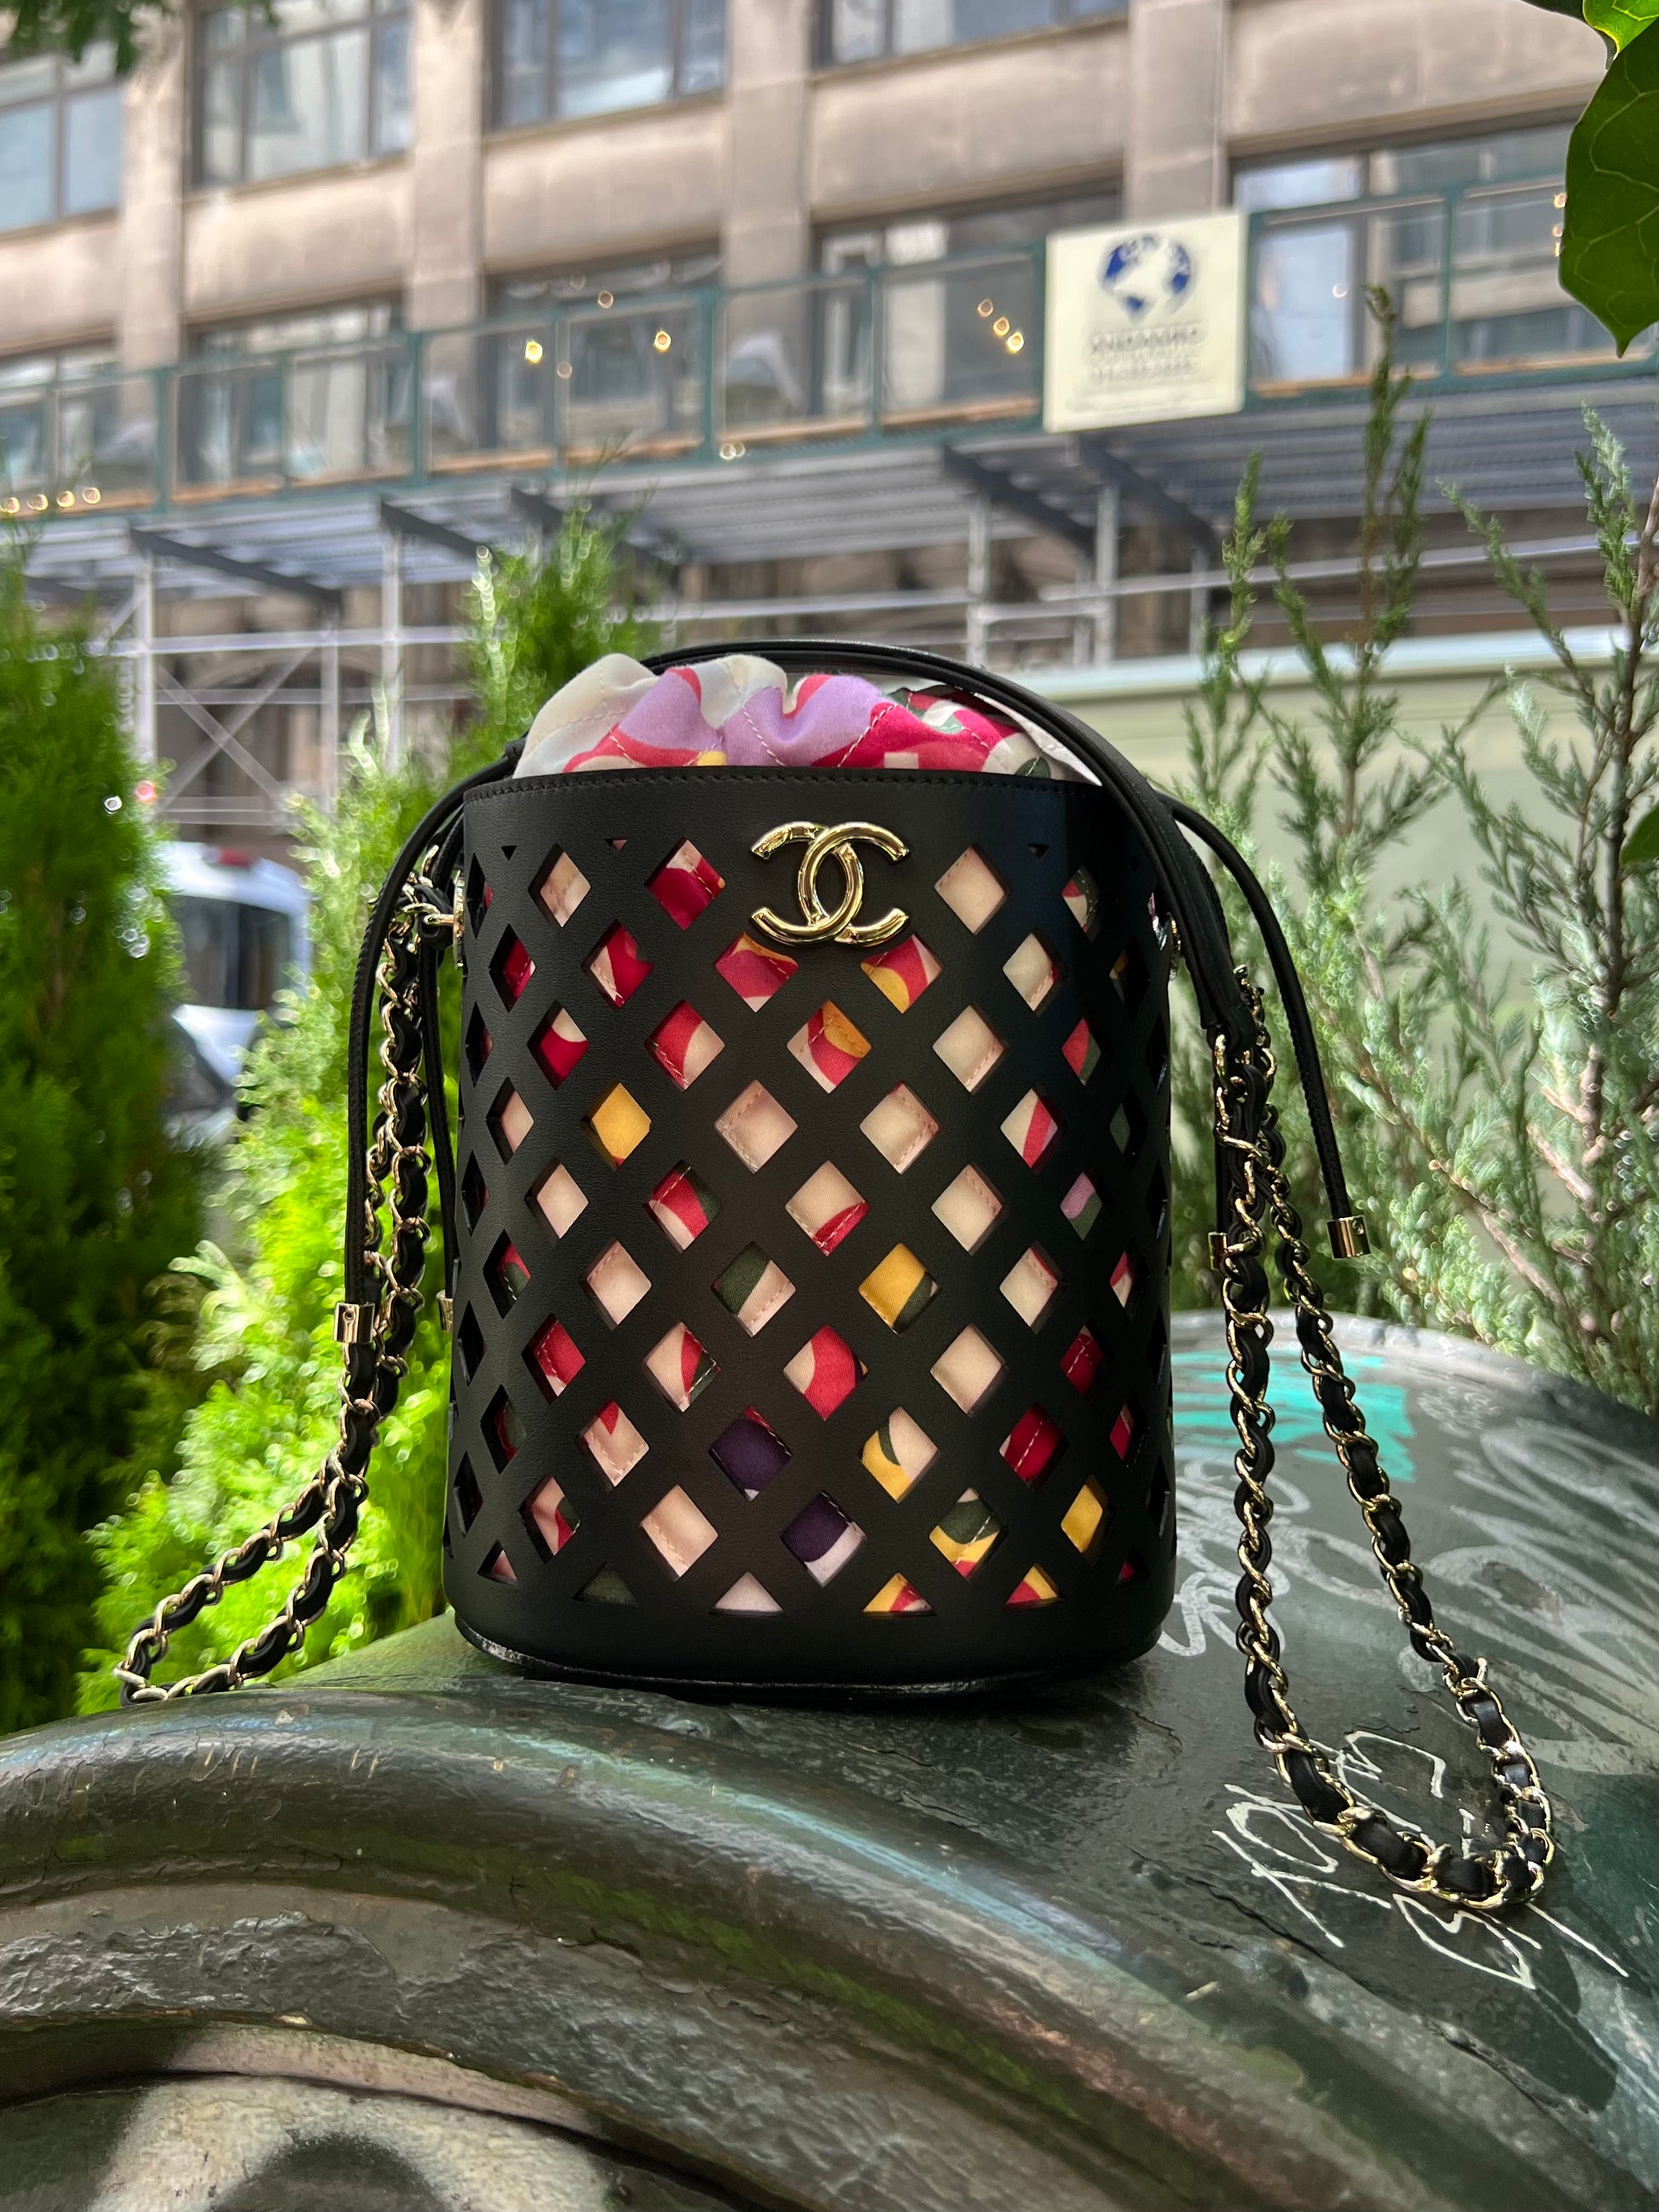 Chanel Black See Through Perforated Leather Bucket Bag W Quilted Drawstring Pouch & Lghw